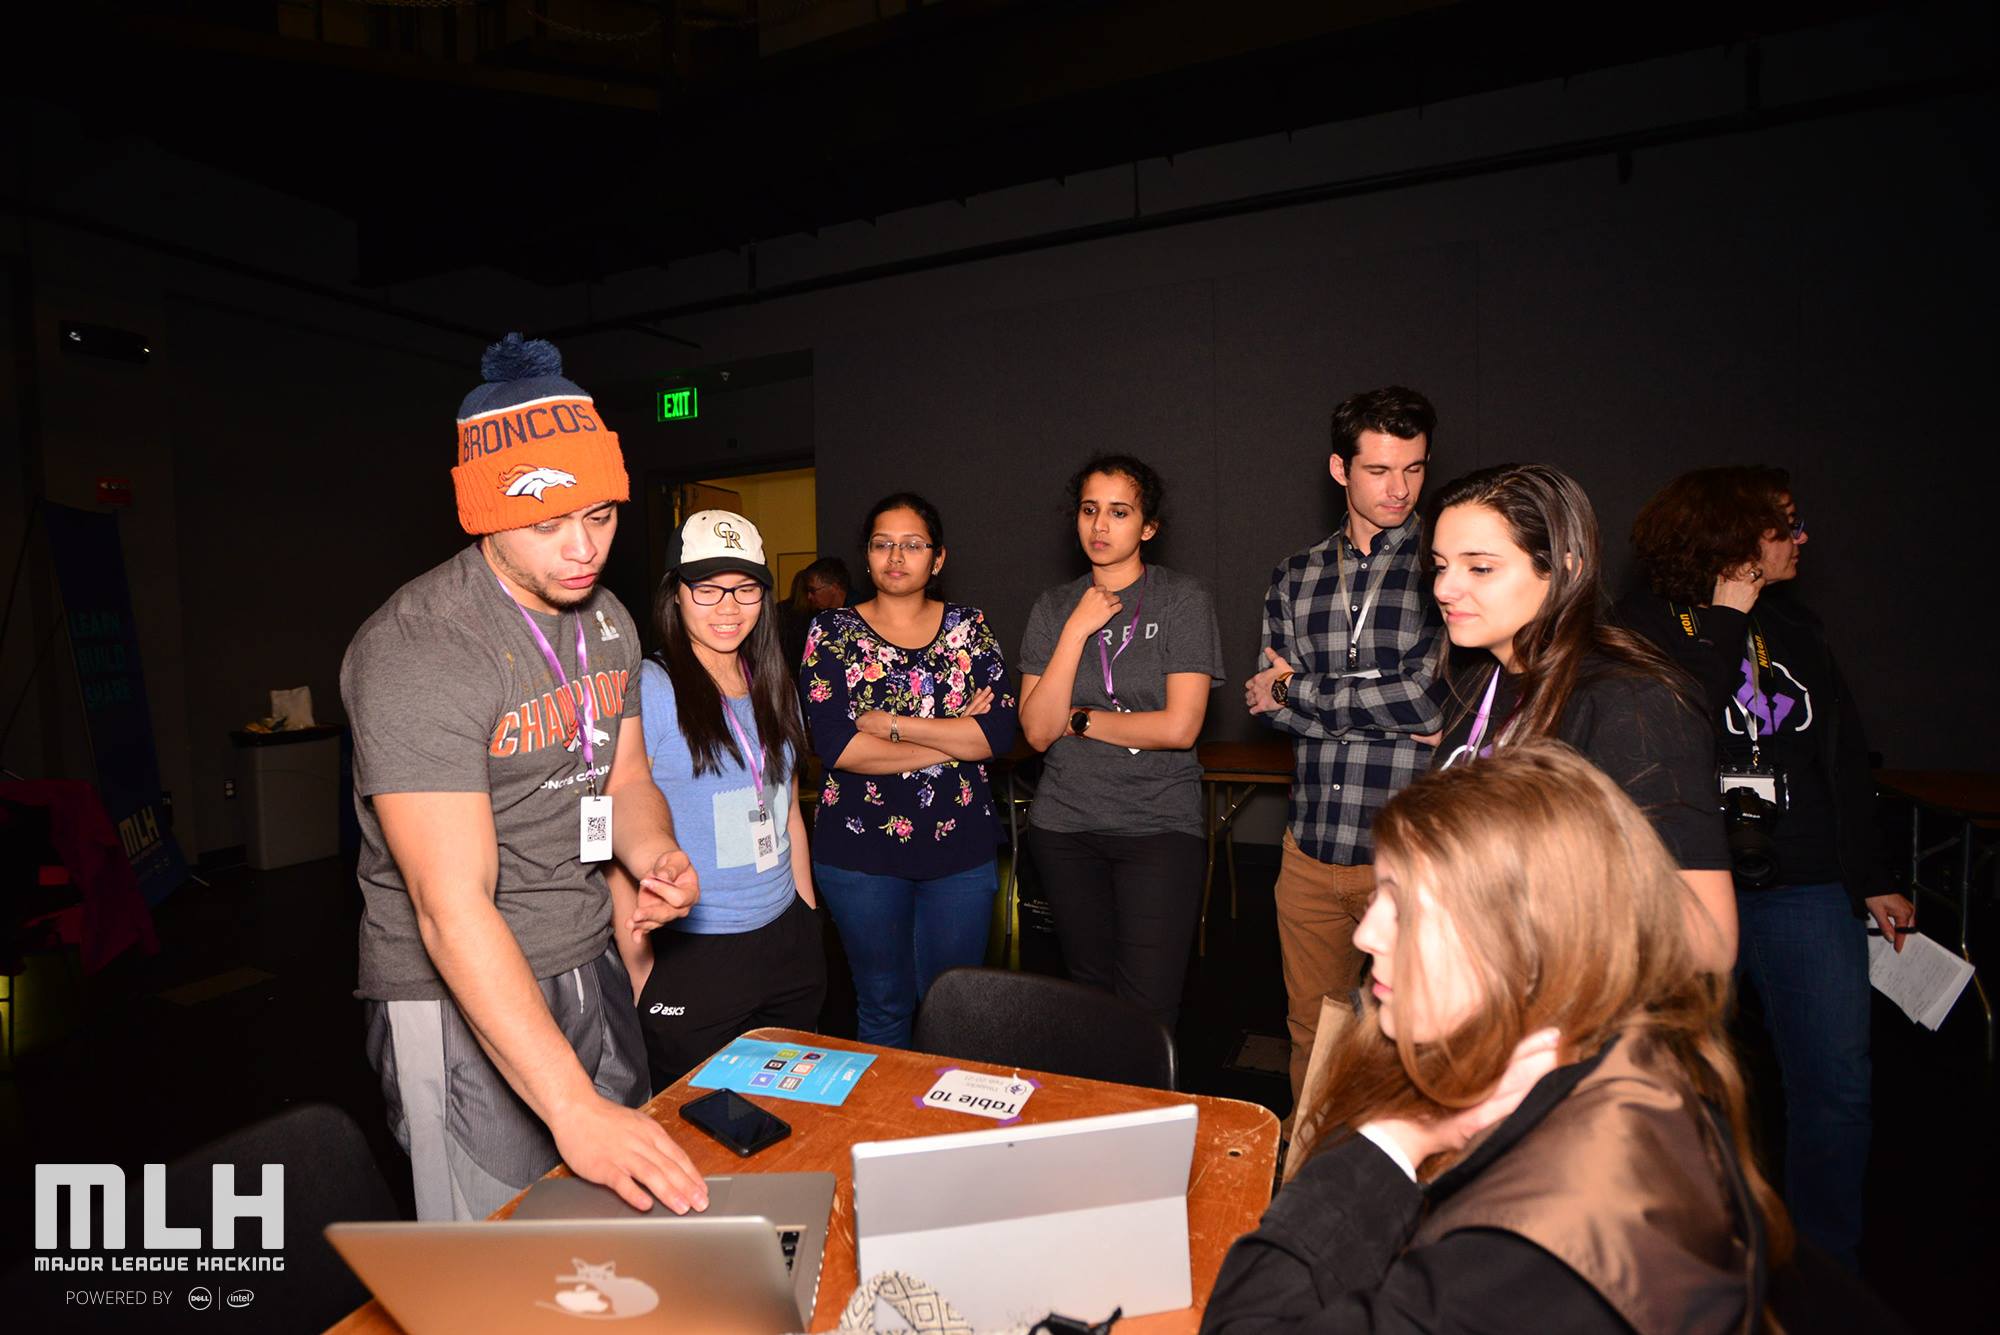 Photos of T9Hackers demoing their projects.